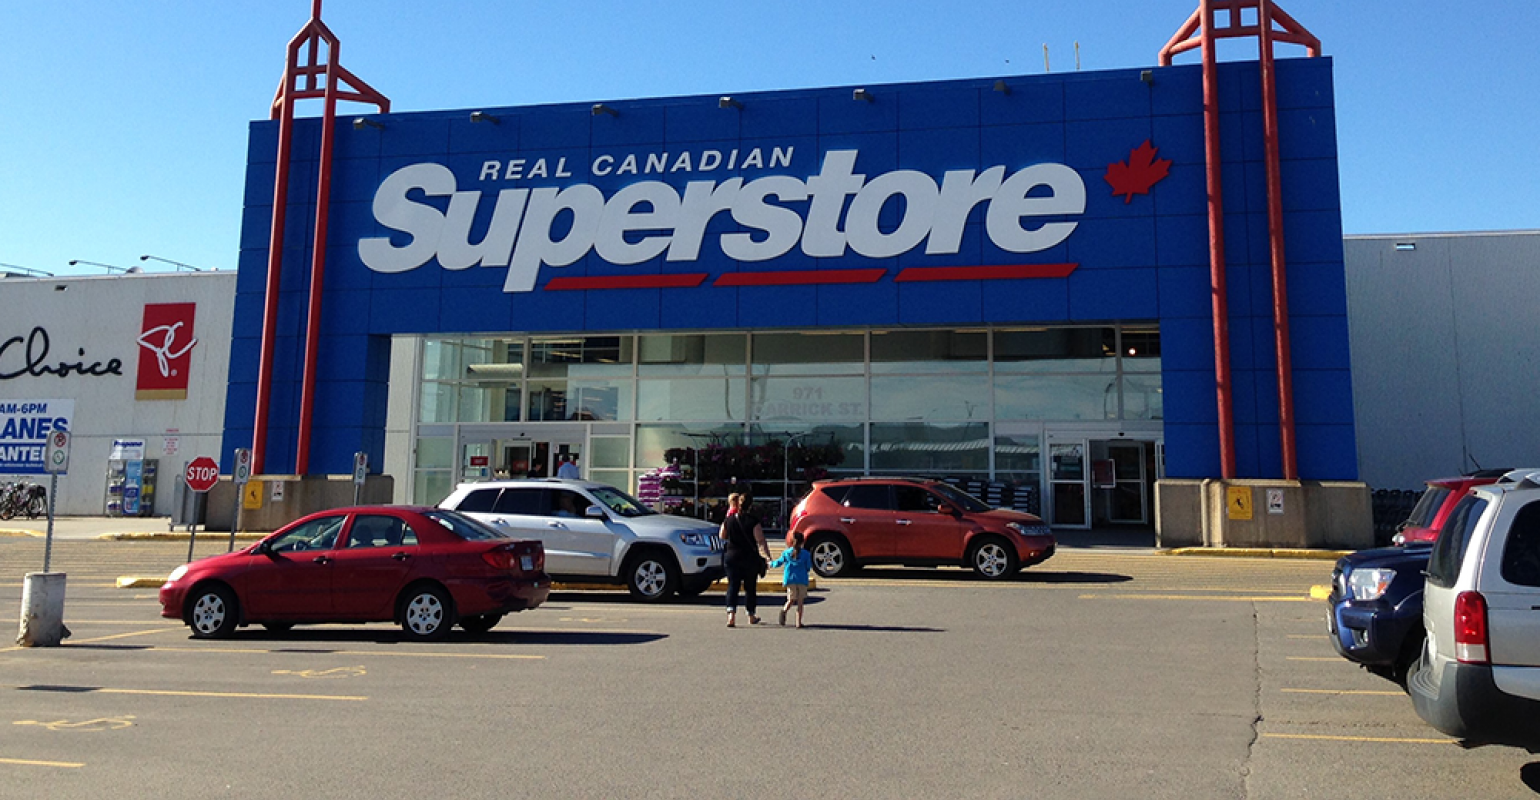 Real Canadian Superstore  Online Grocery Shopping : Pickup & Delivery